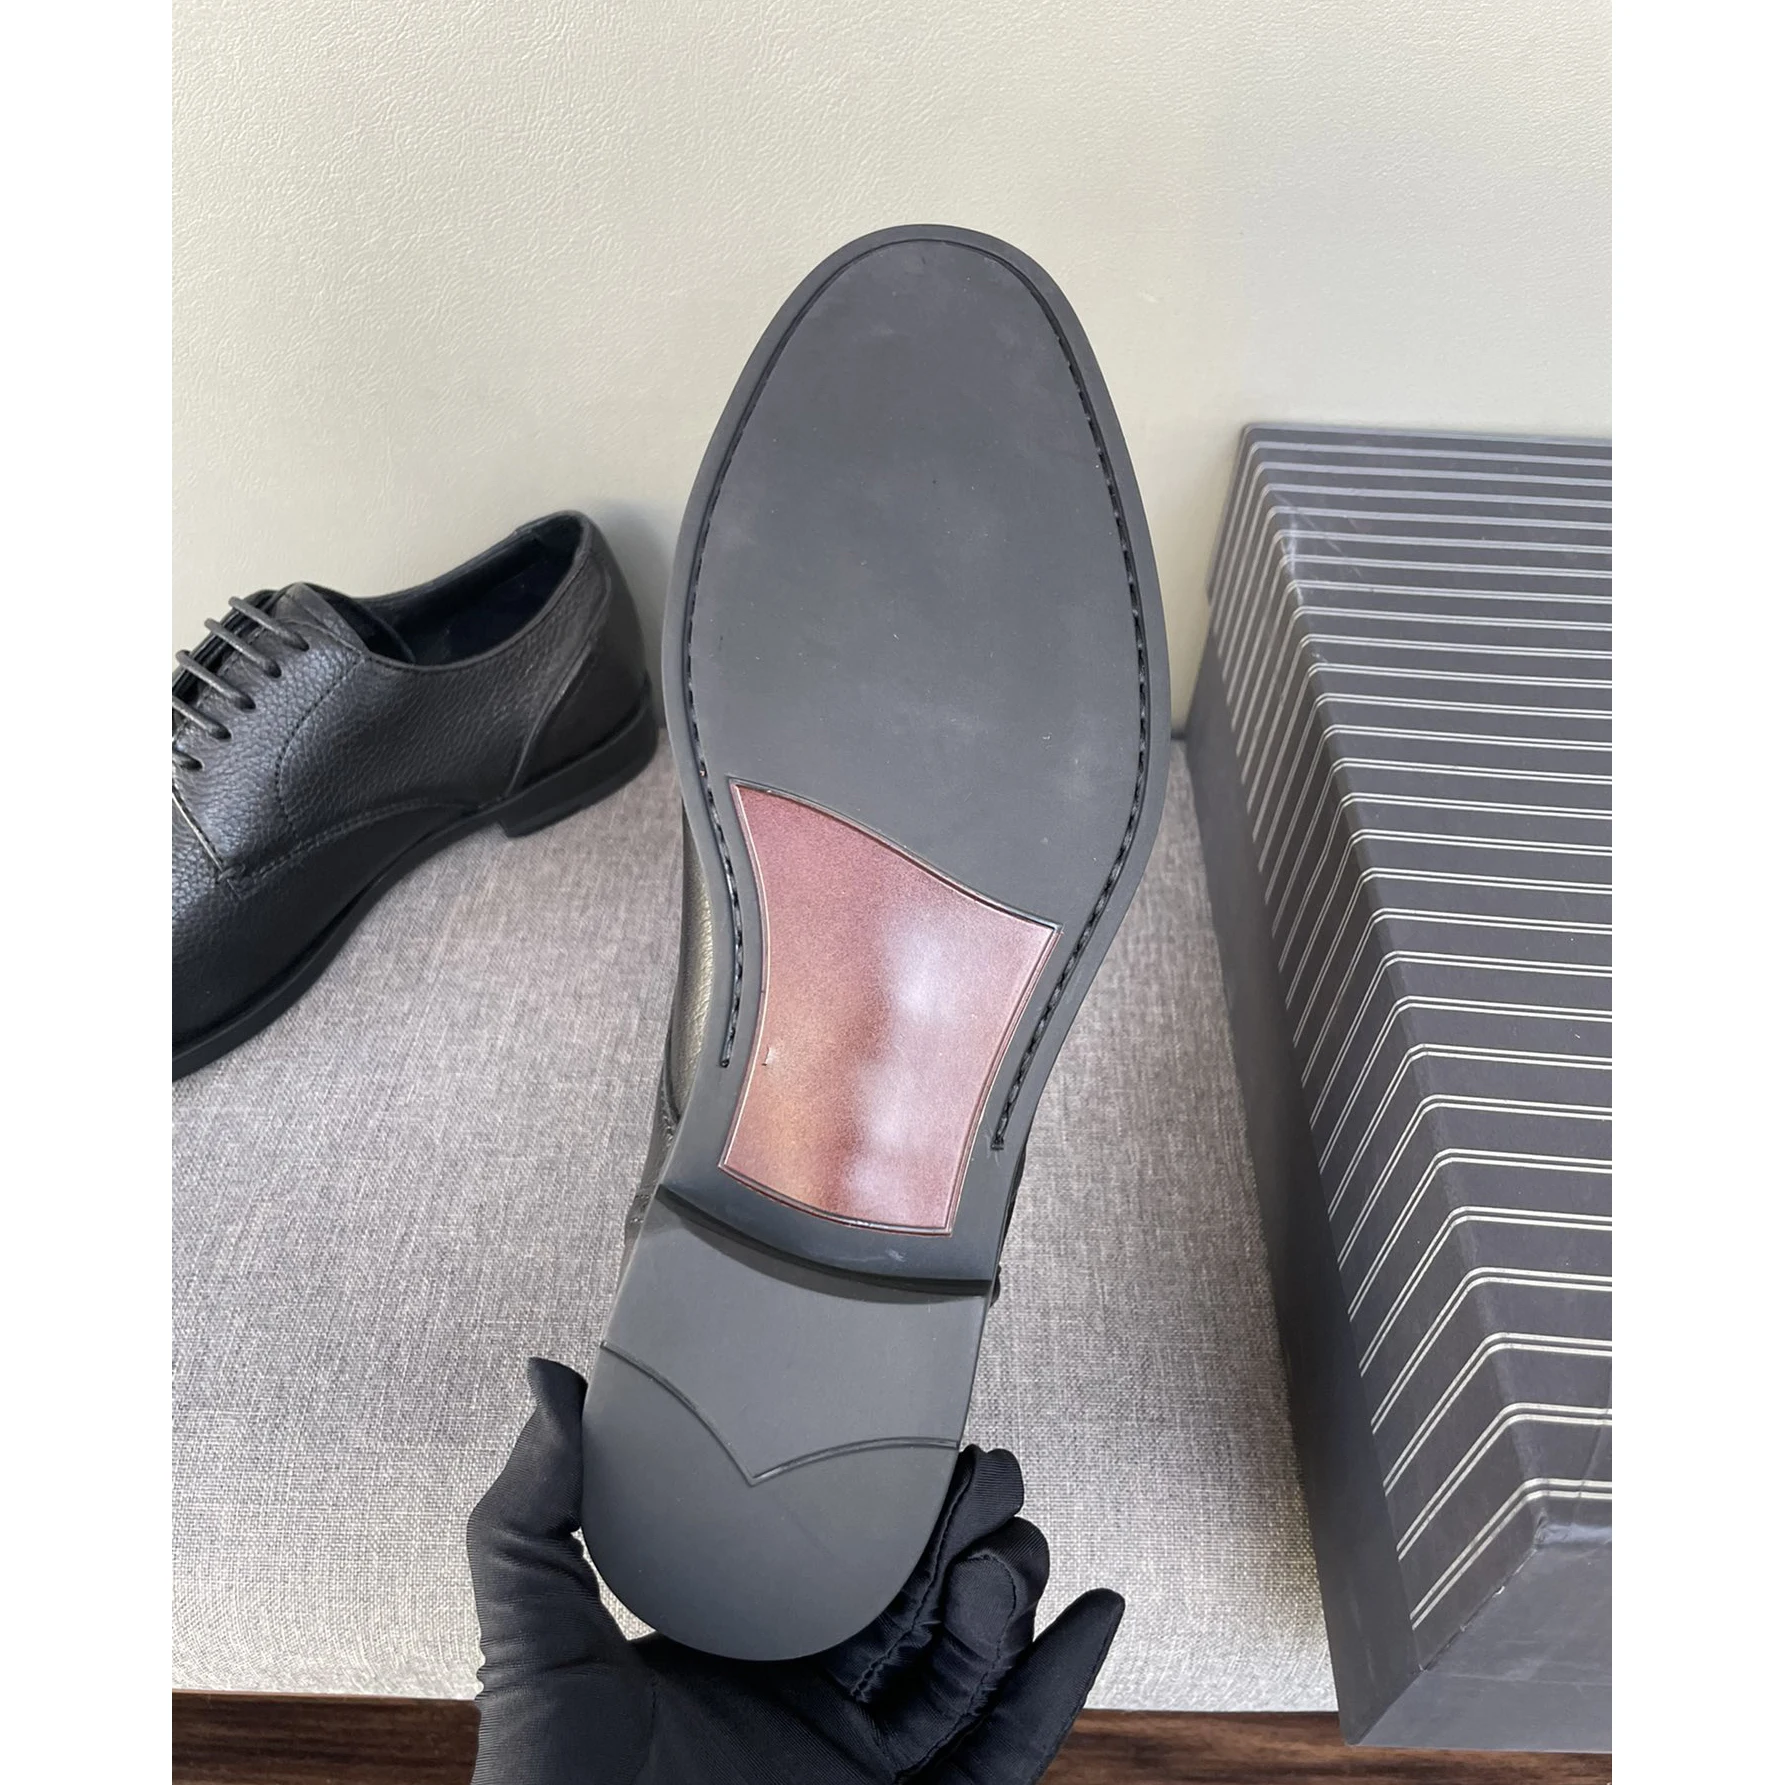 

2021 new Zegna high-end men's business casual shoes, made of imported real deerskin, leather soft and delicate